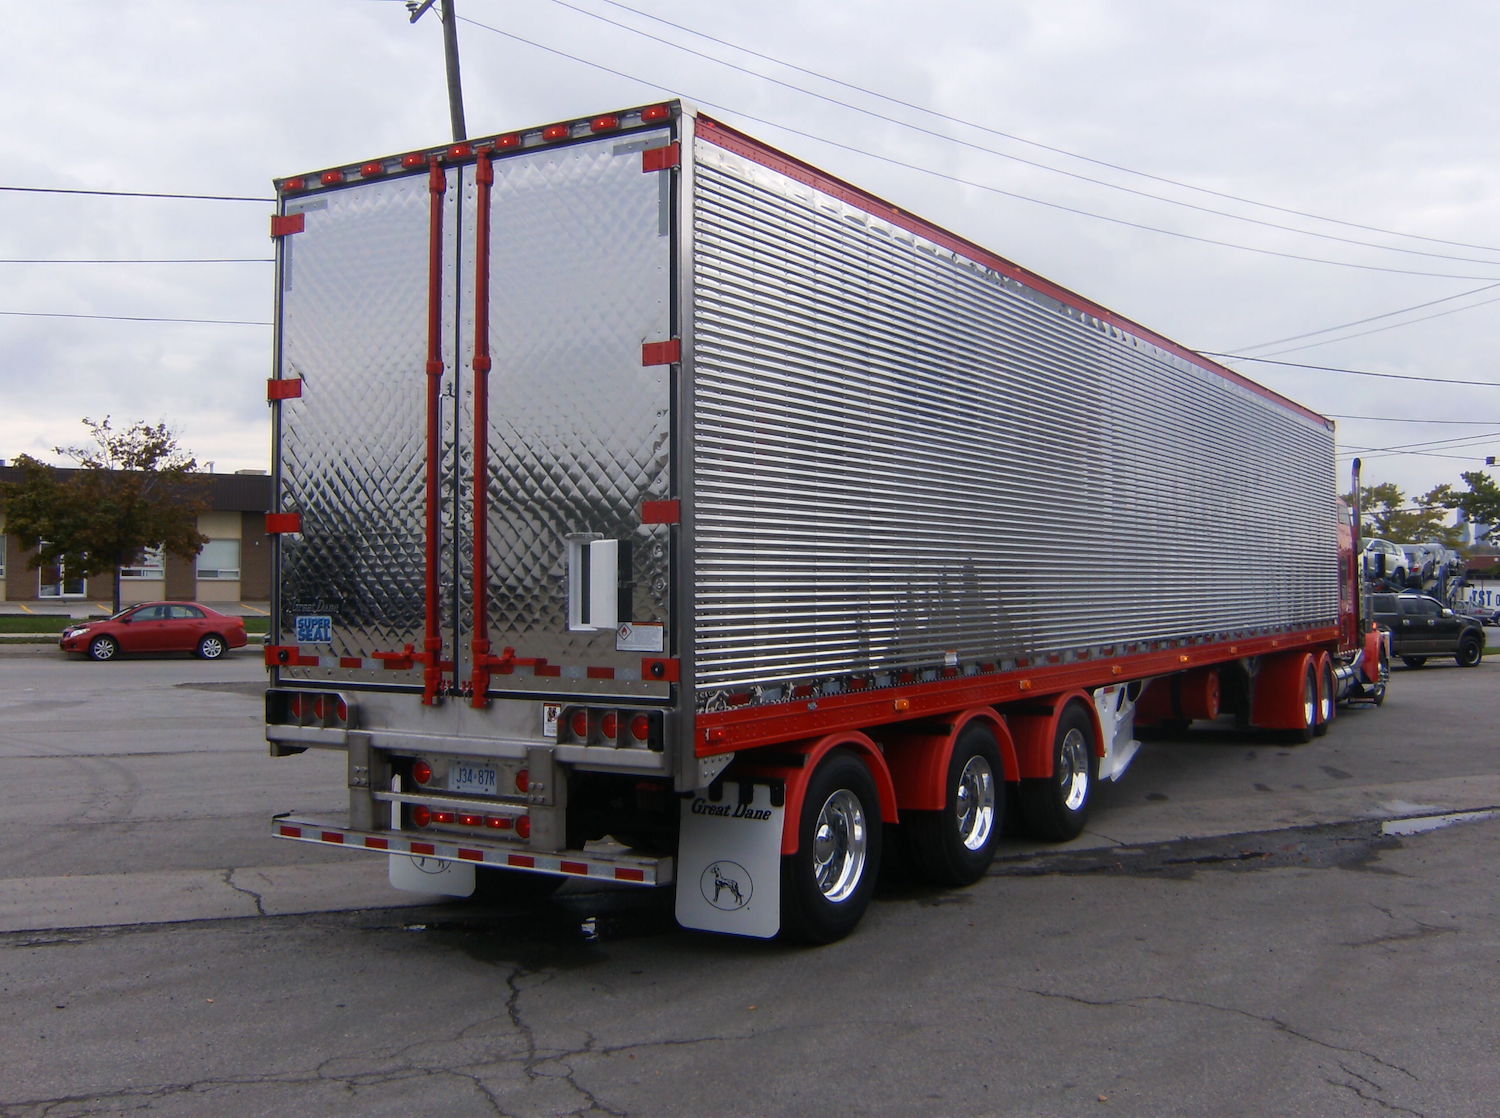 A refrigerated semi truck trailer with an open rear vent door, the truck tractor and a street visible in the background.